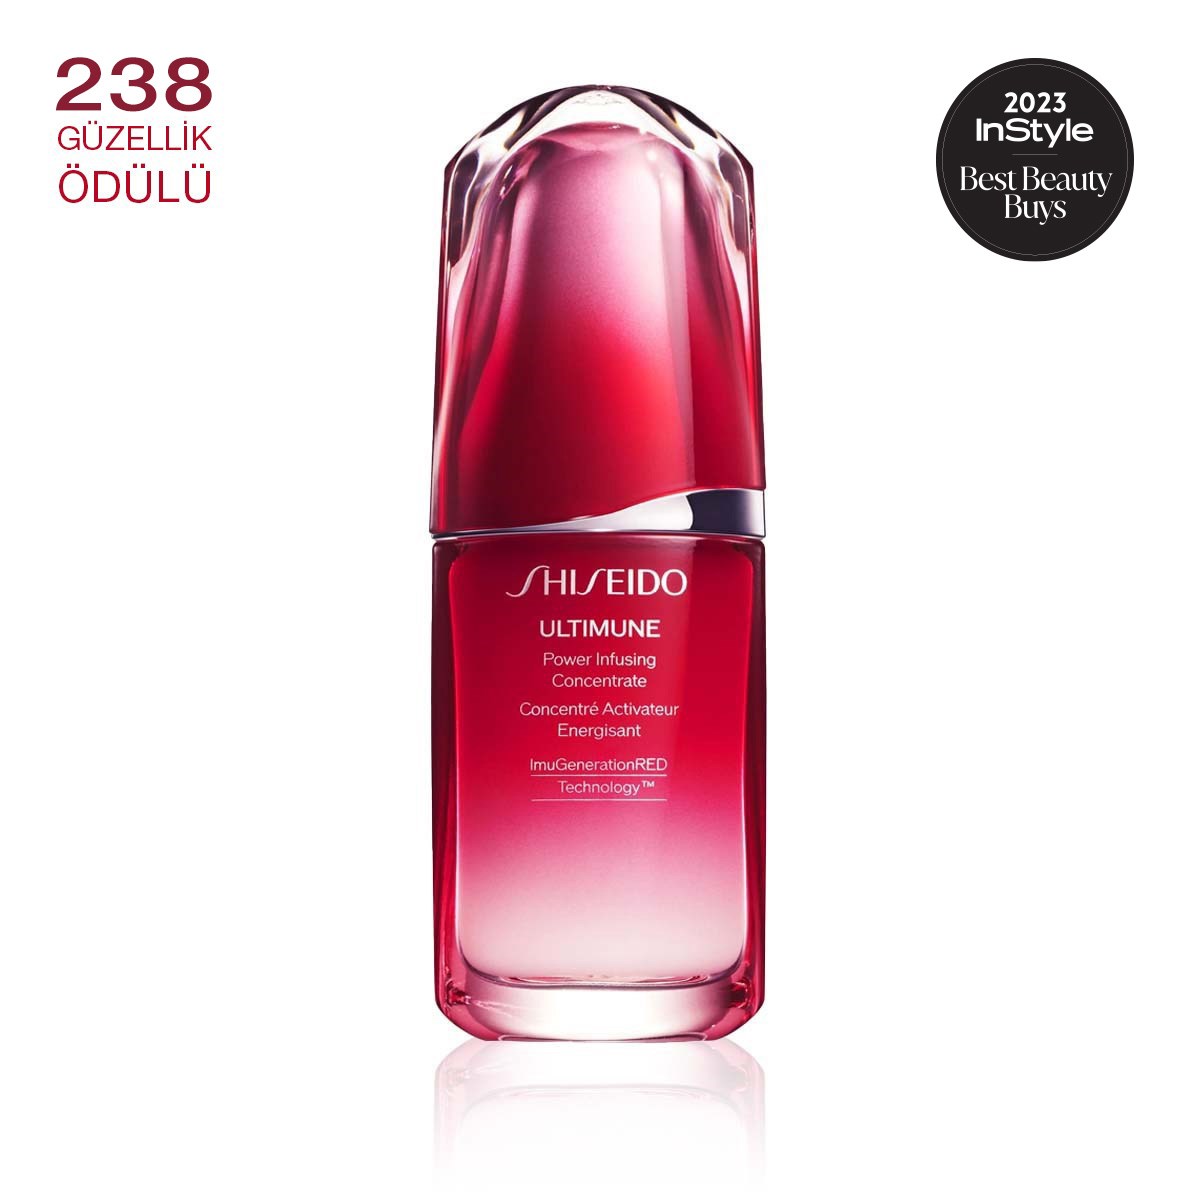 ULTIMUNE POWER INFUSING CONCENTRATE - 50ML 1